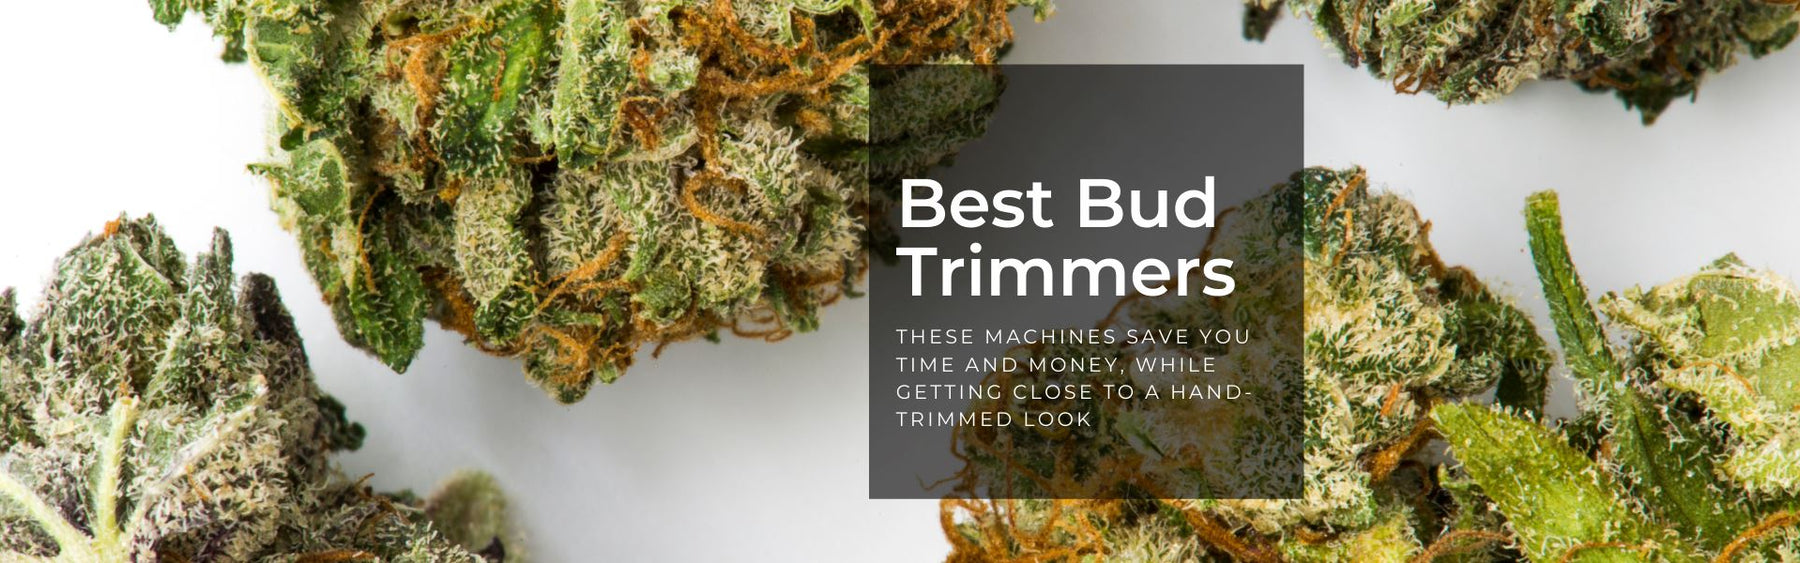 Best Bud Trimmers—Top Trimming Machines of 2020